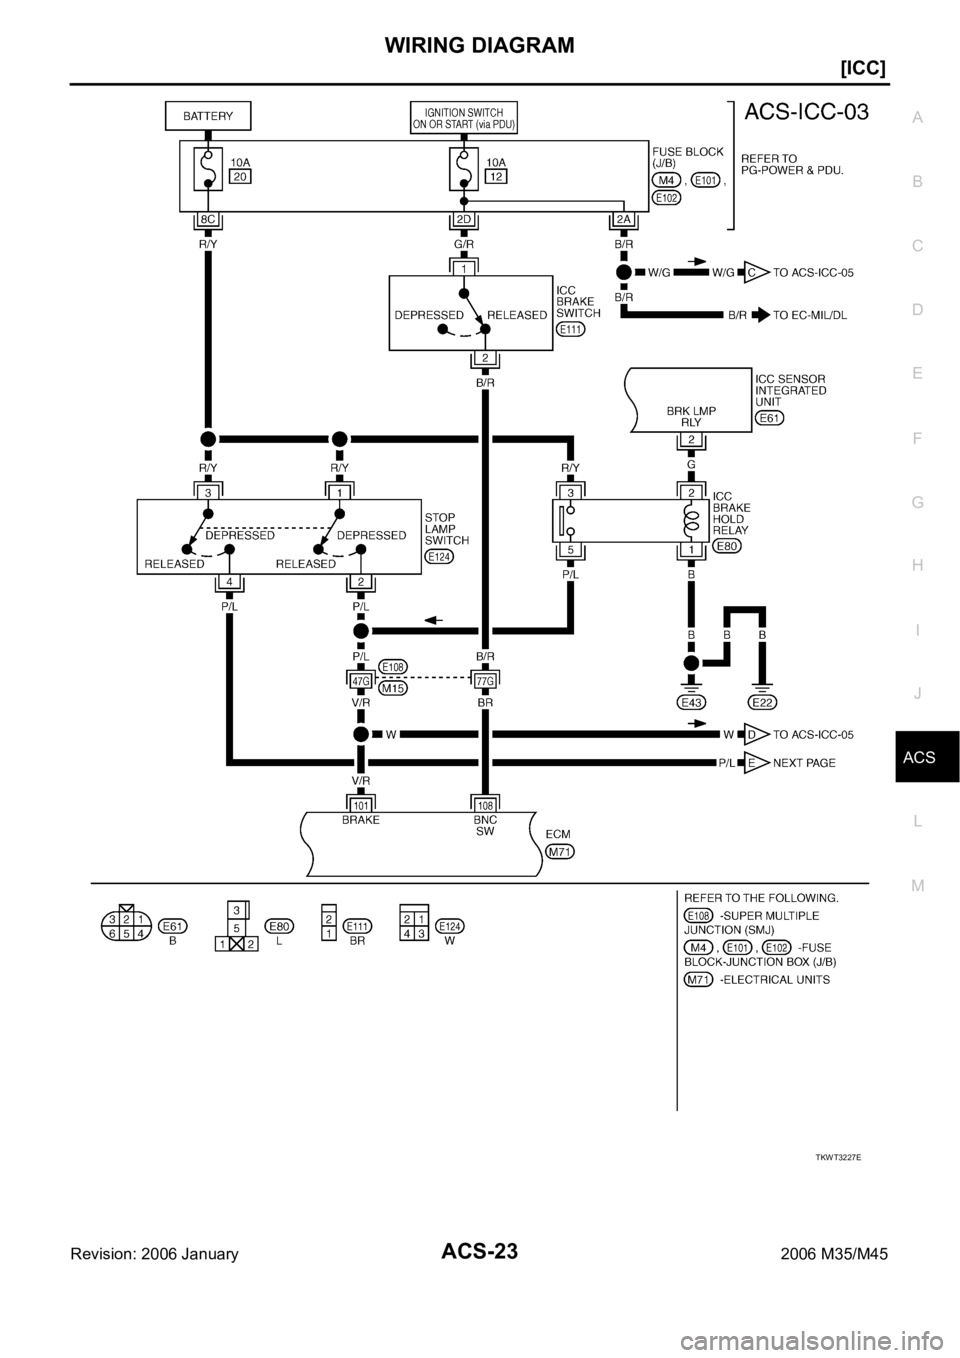 INFINITI M35 2006  Factory Owners Guide WIRING DIAGRAM
ACS-23
[ICC]
C
D
E
F
G
H
I
J
L
MA
B
ACS
Revision: 2006 January2006 M35/M45
TKWT3227E 